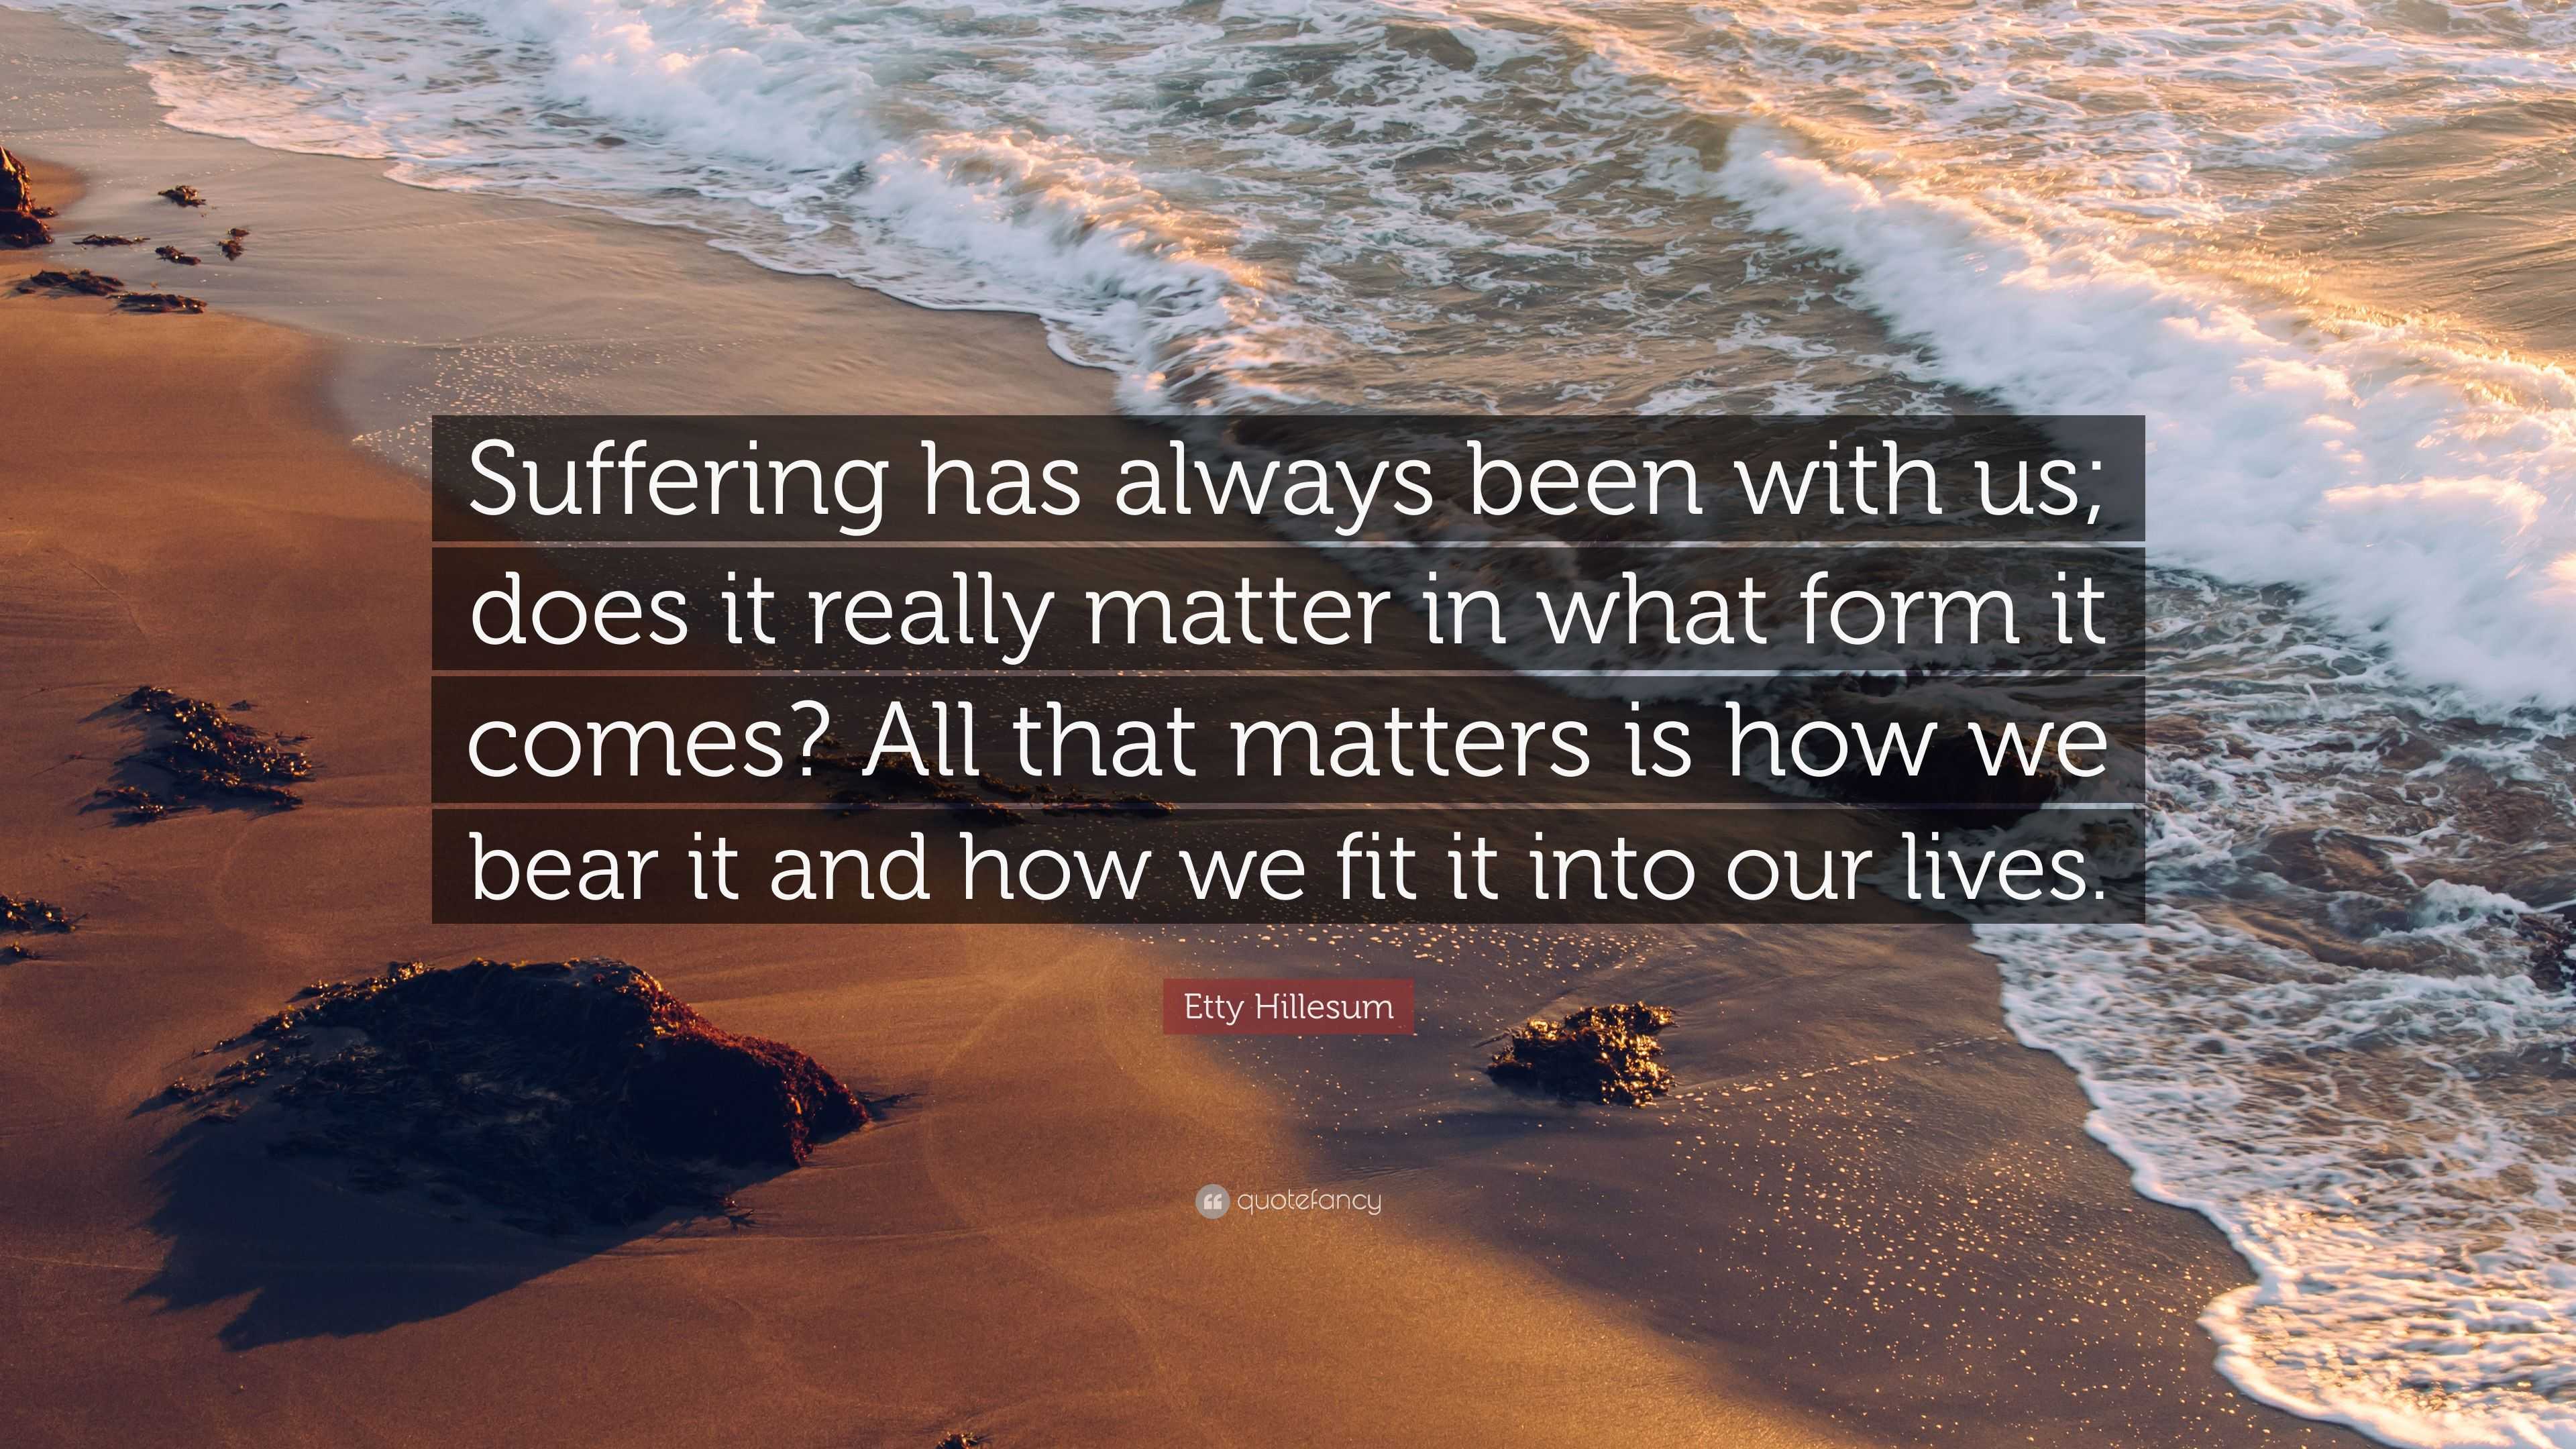 Etty Hillesum Quote “Suffering has always been with us; does it really